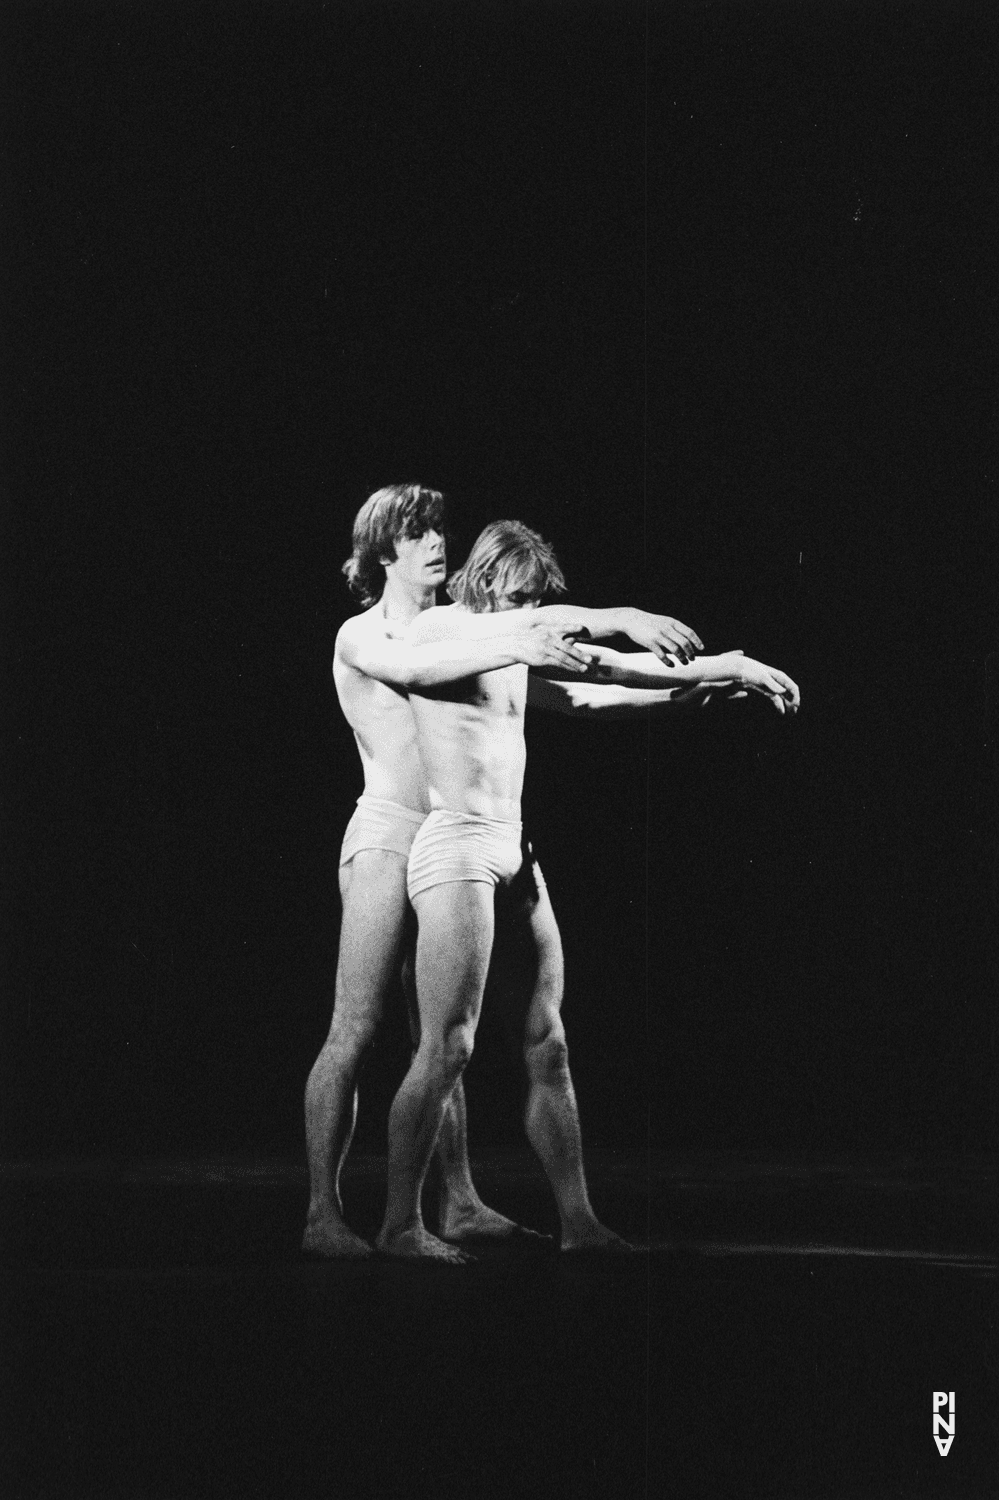 Ed Kortlandt and Dominique Mercy in “Iphigenie auf Tauris” by Pina Bausch with Tanztheater Wuppertal at Opernhaus Wuppertal (Germany), April 20, 1974